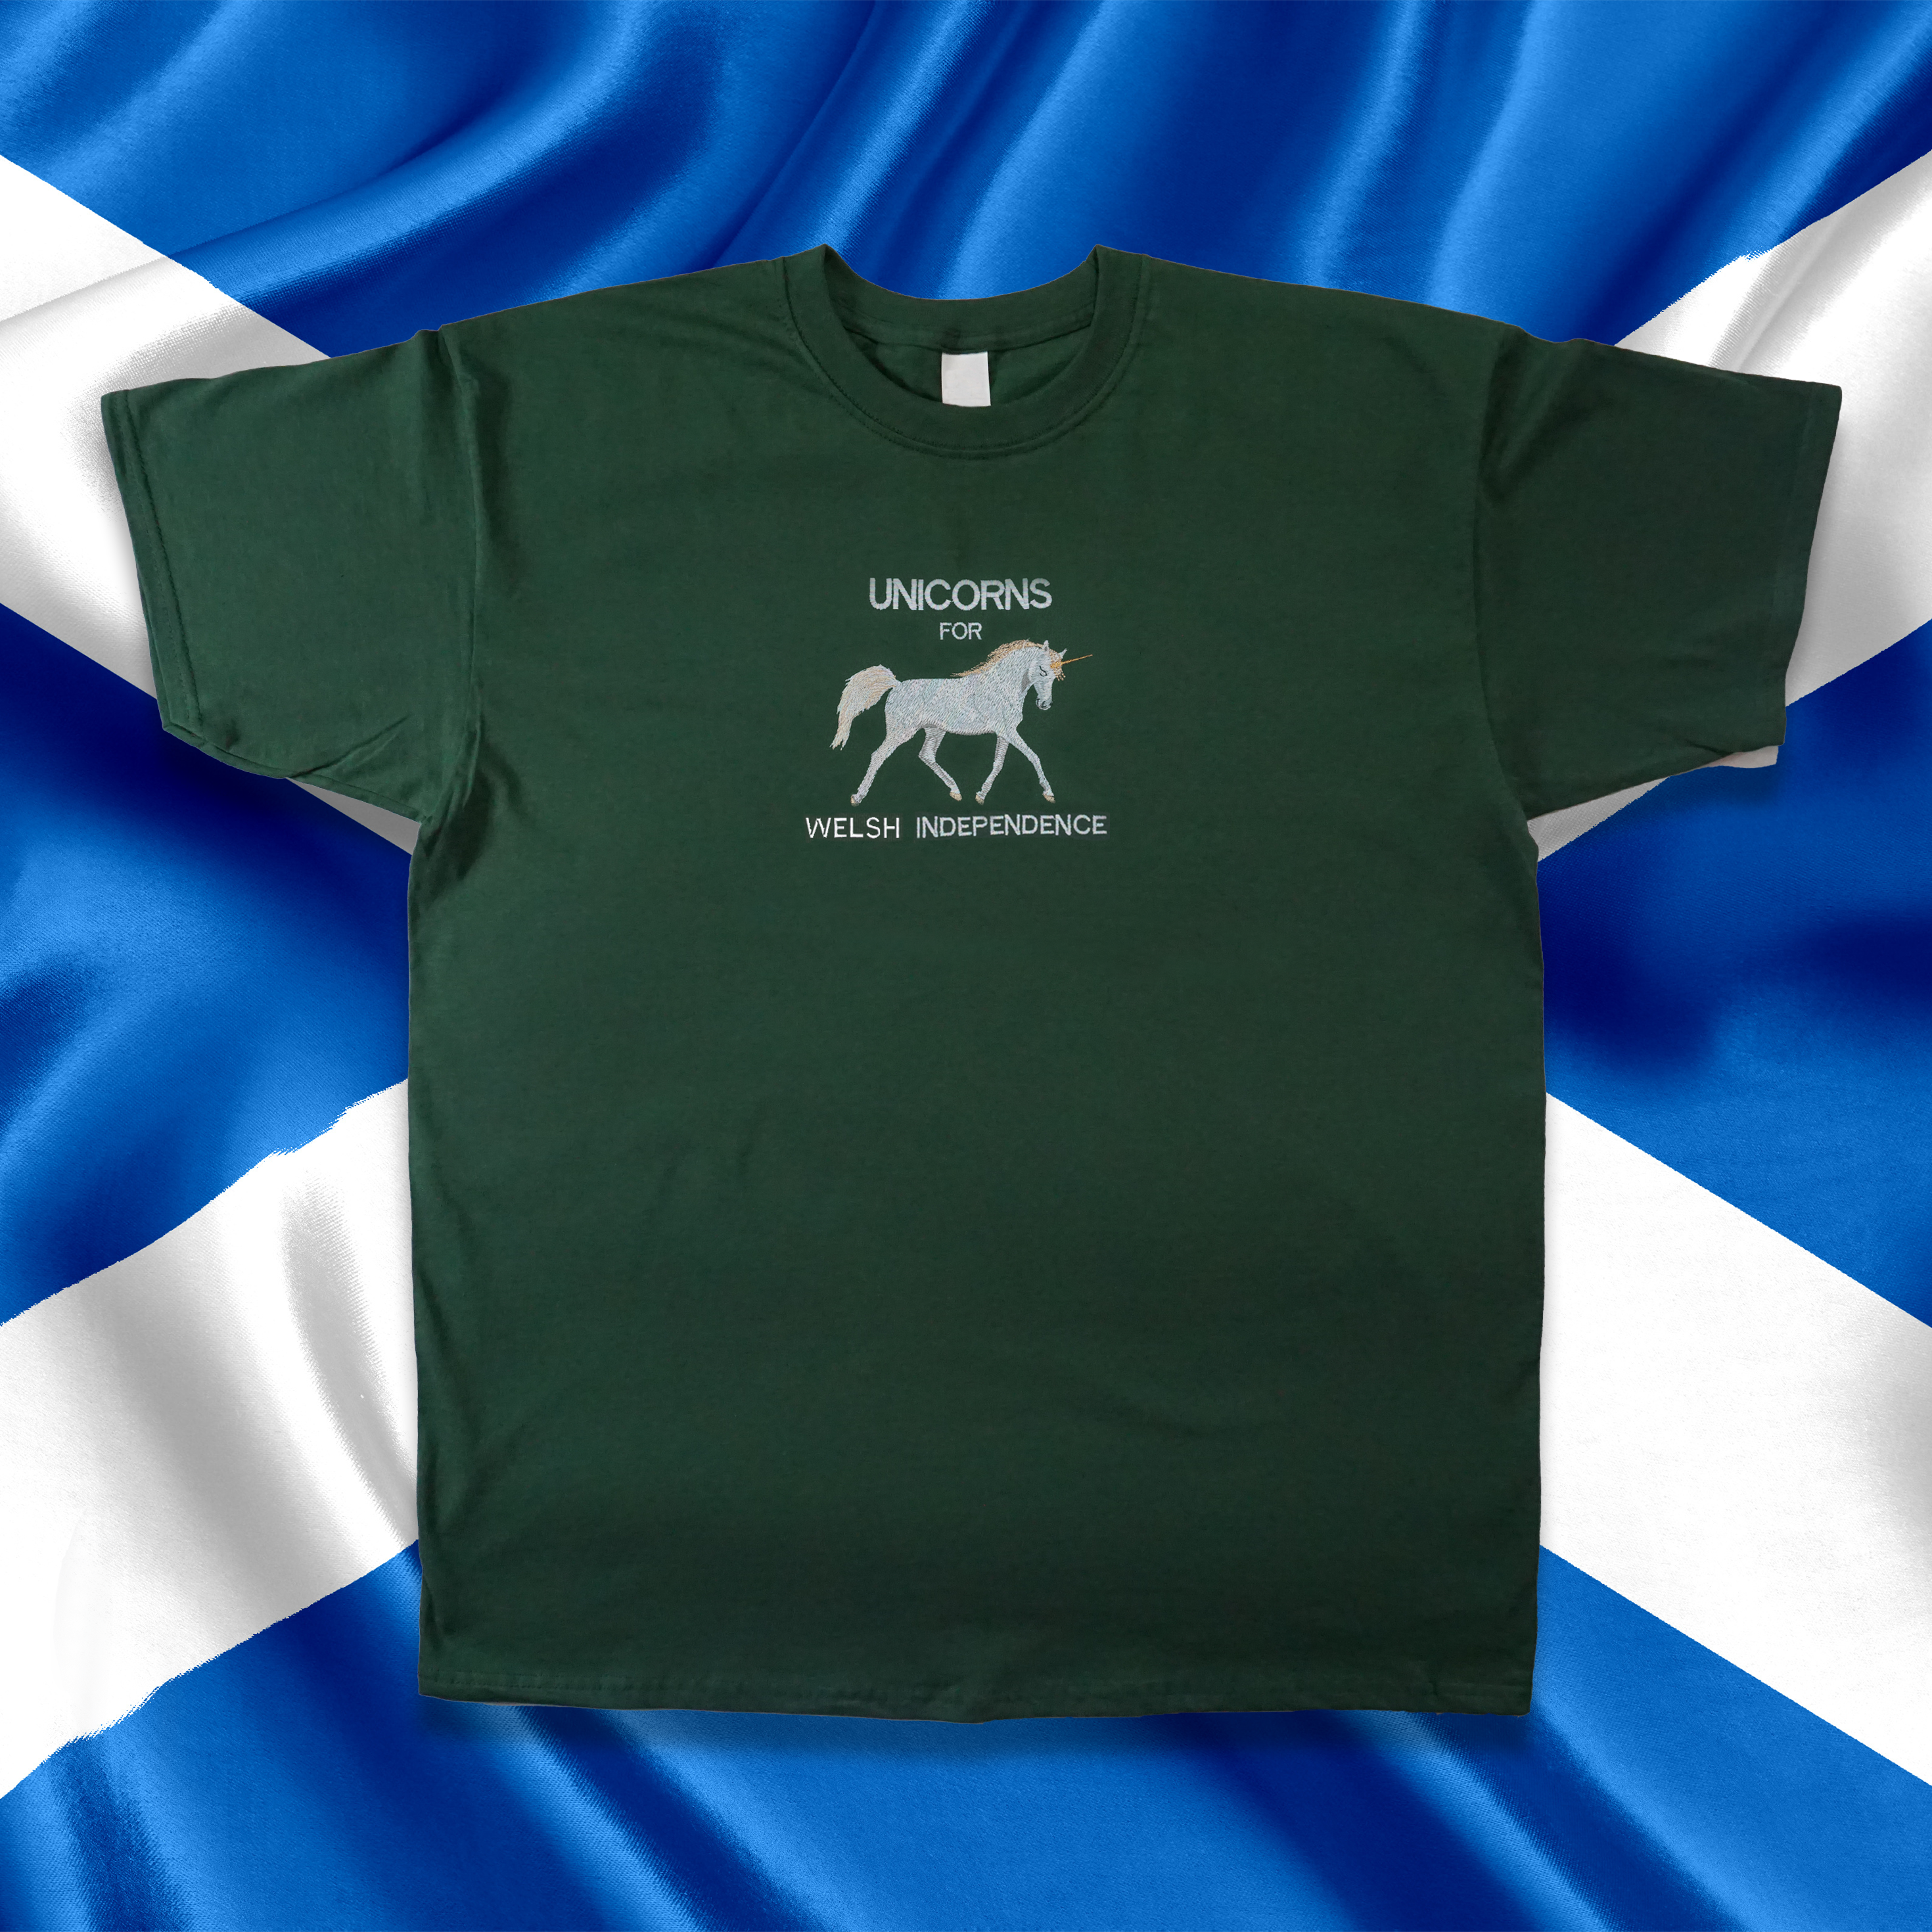 UNICORNS FOR WELSH INDEPENDENCE T-SHIRT